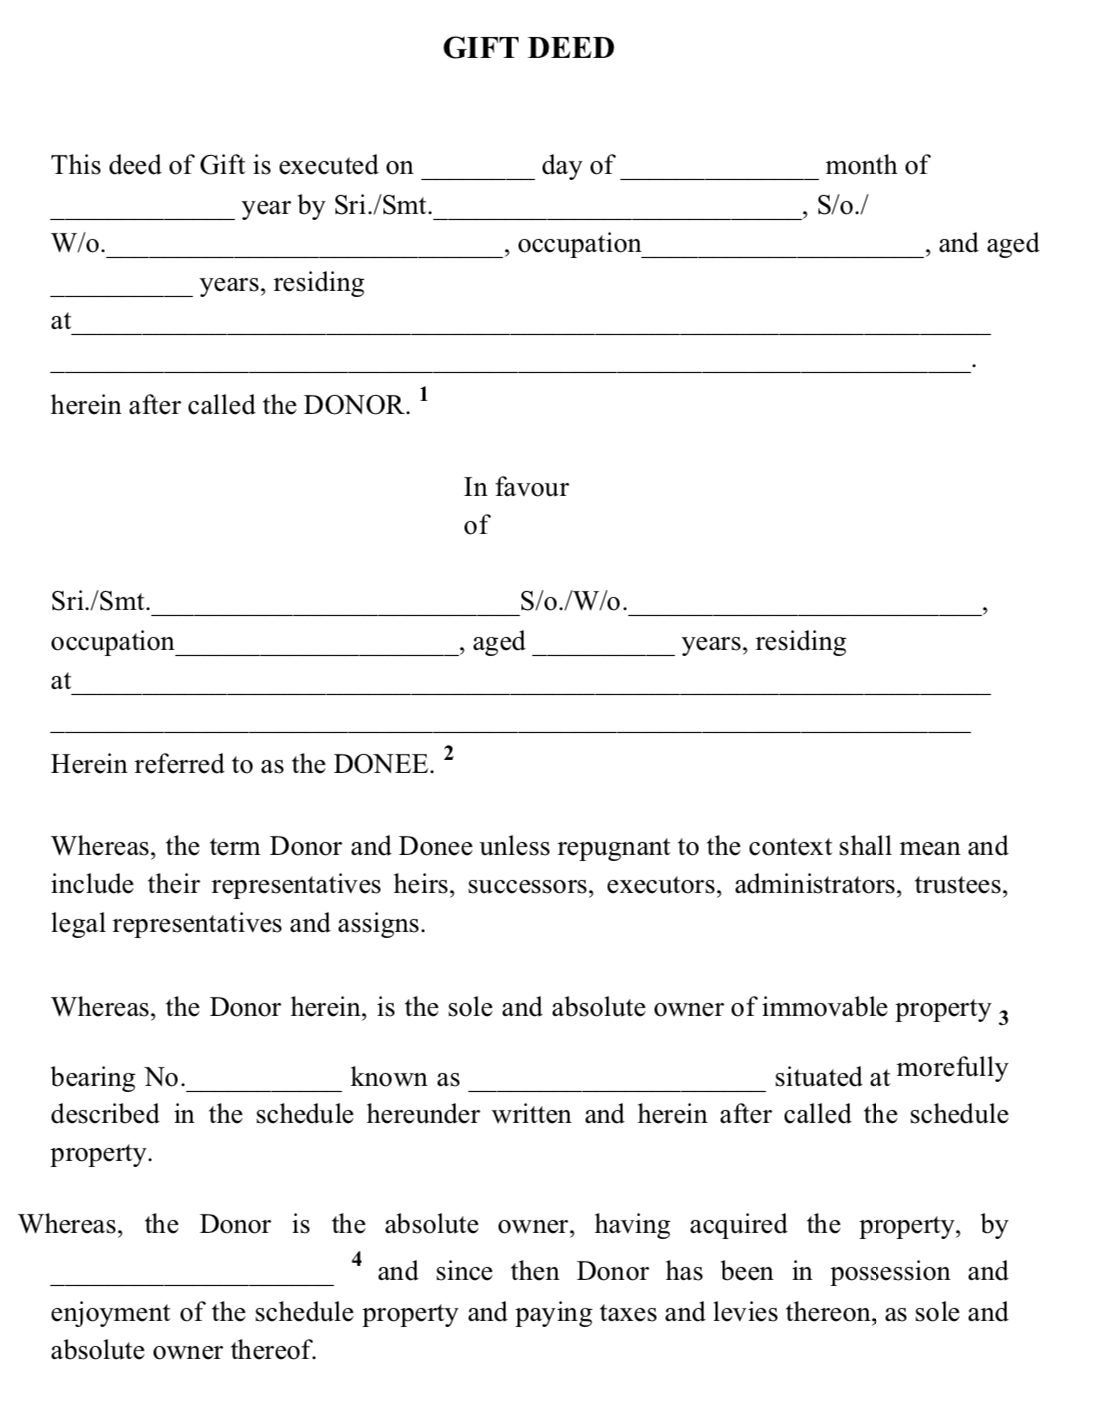 free-printable-gift-deed-form-texas-printable-forms-free-online